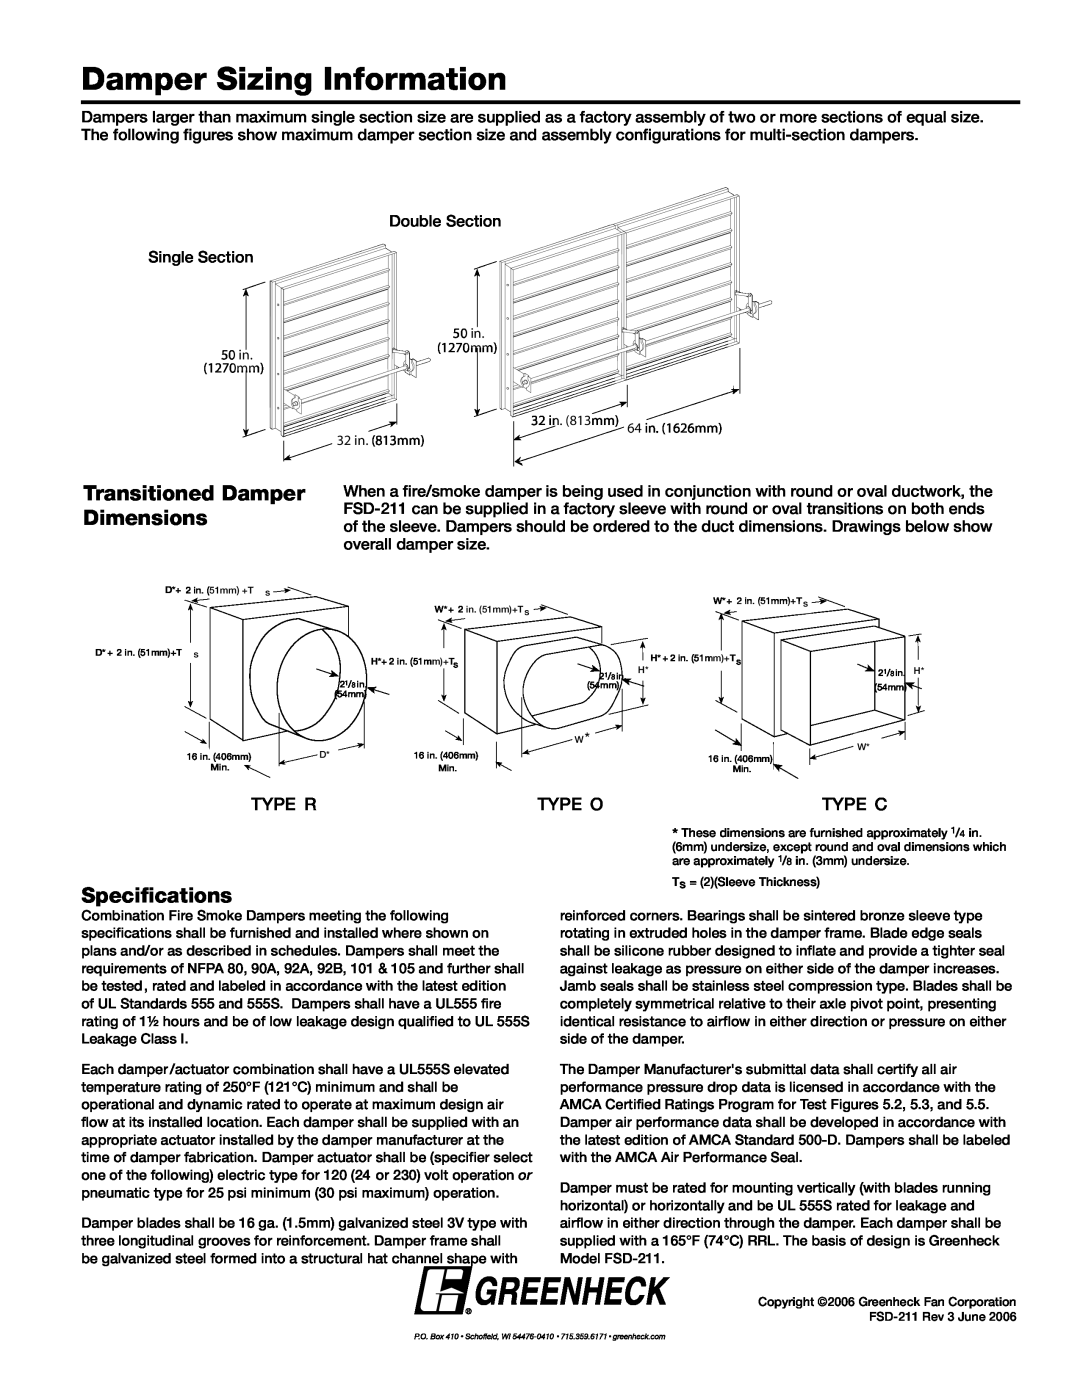 Greenheck Fan FSD-211 dimensions Damper Sizing Information, Transitioned Damper Dimensions, Specifications 